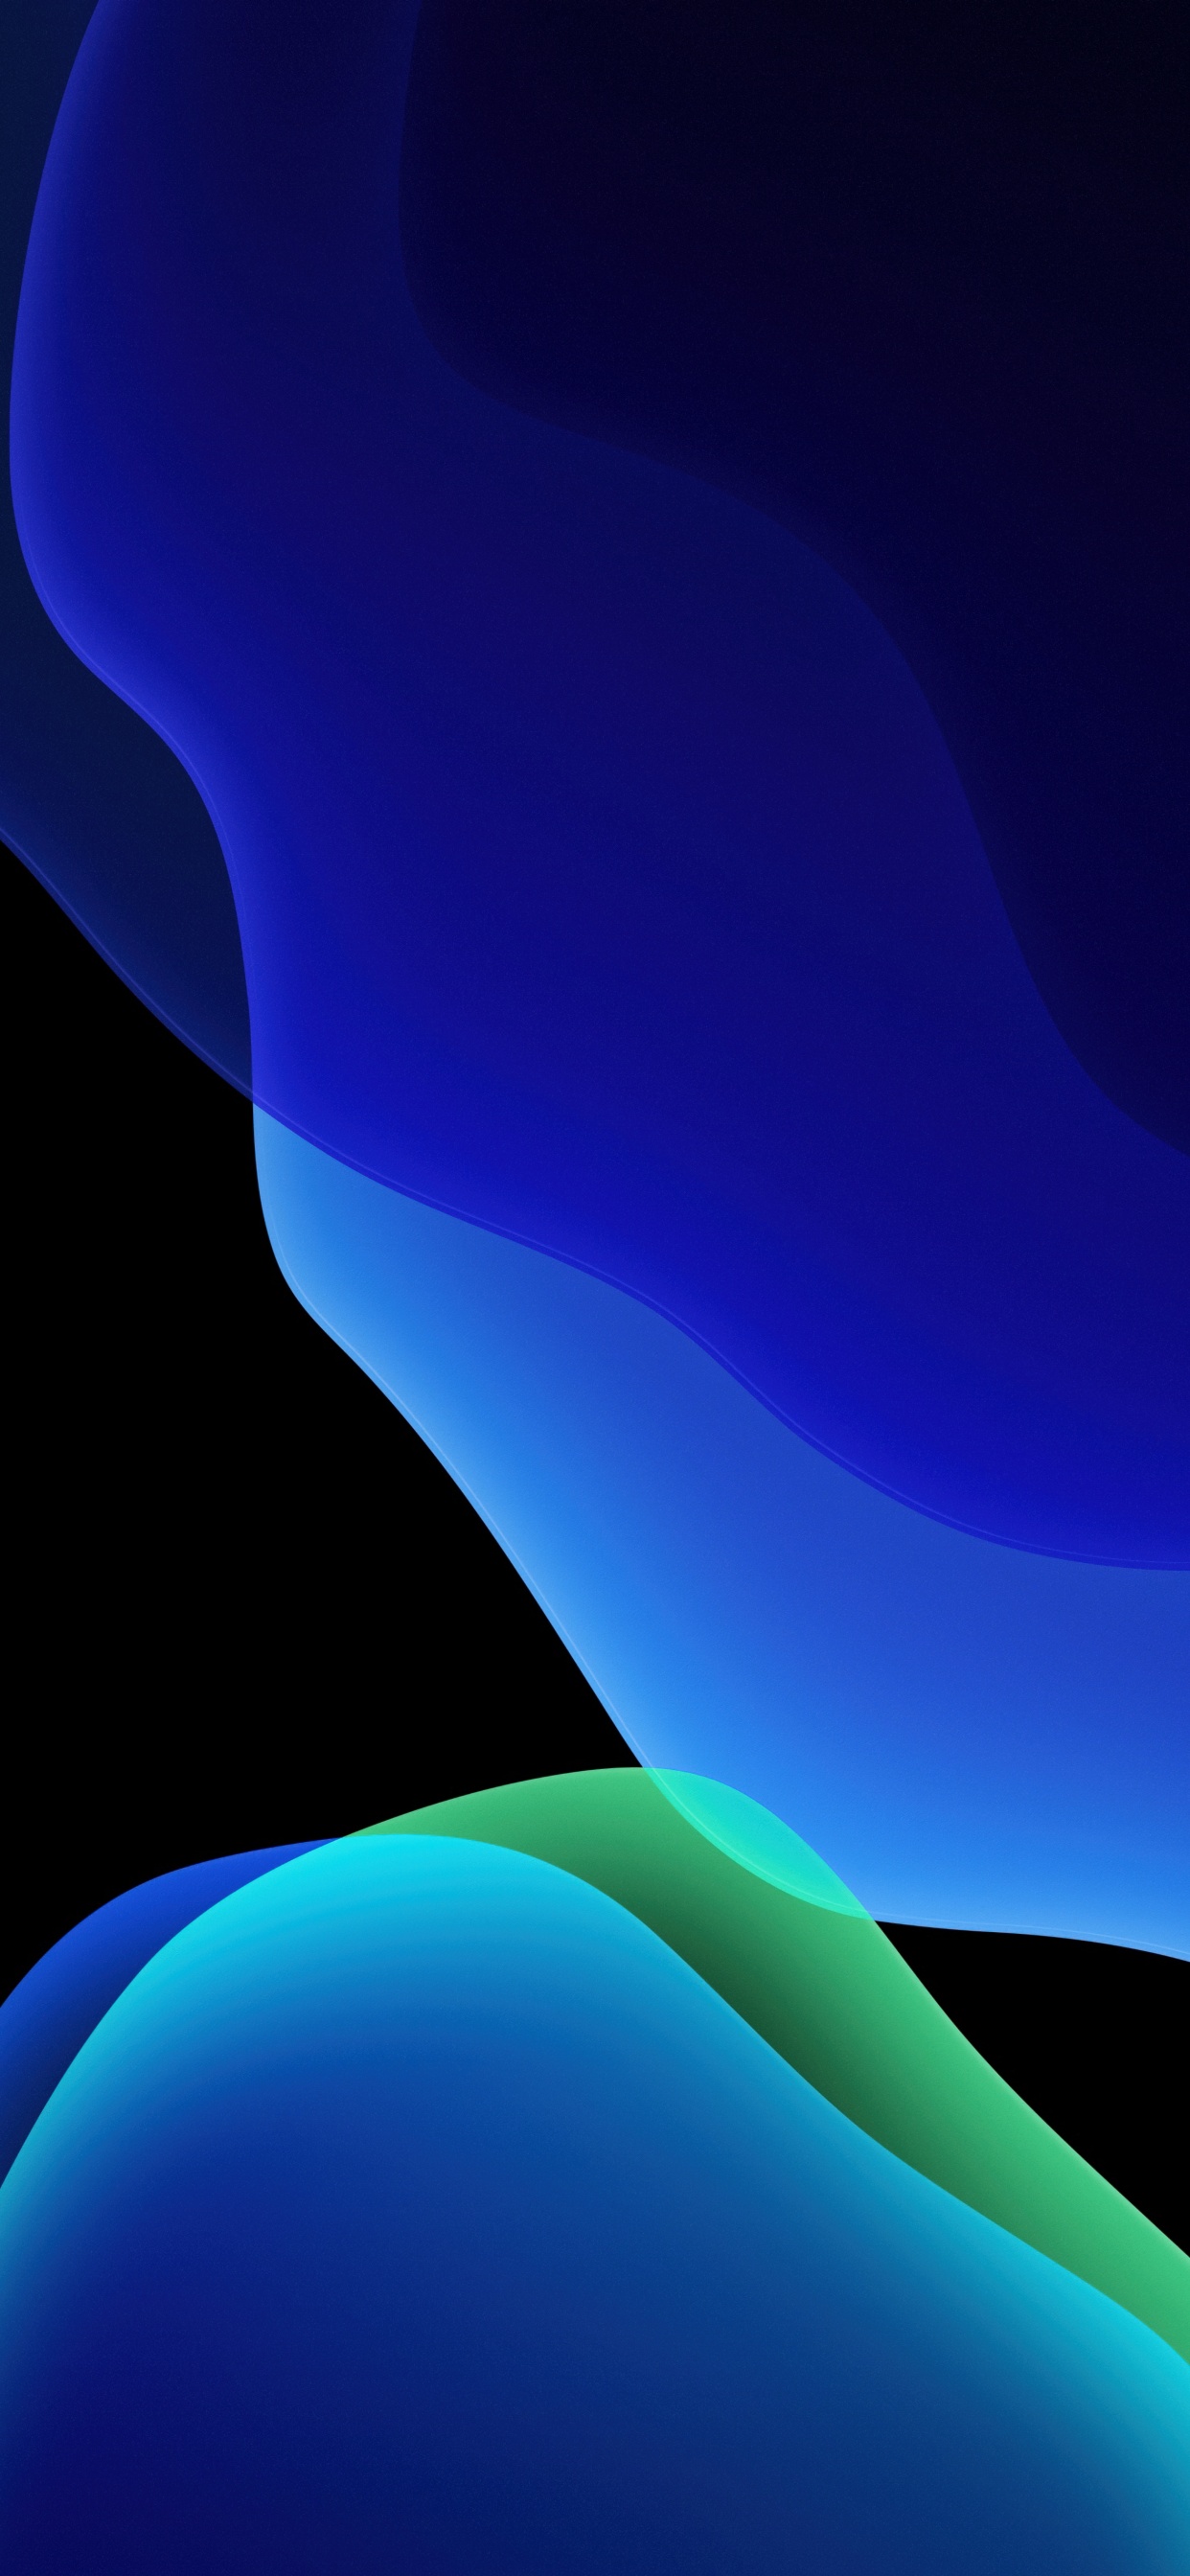 Amoled Wallpaper 4K - Ultra Hd Amoled Wallpapers 4k 1301x2820 Download Hd Wallpaper Wallpapertip / Wallpapers are selected for each device individually.